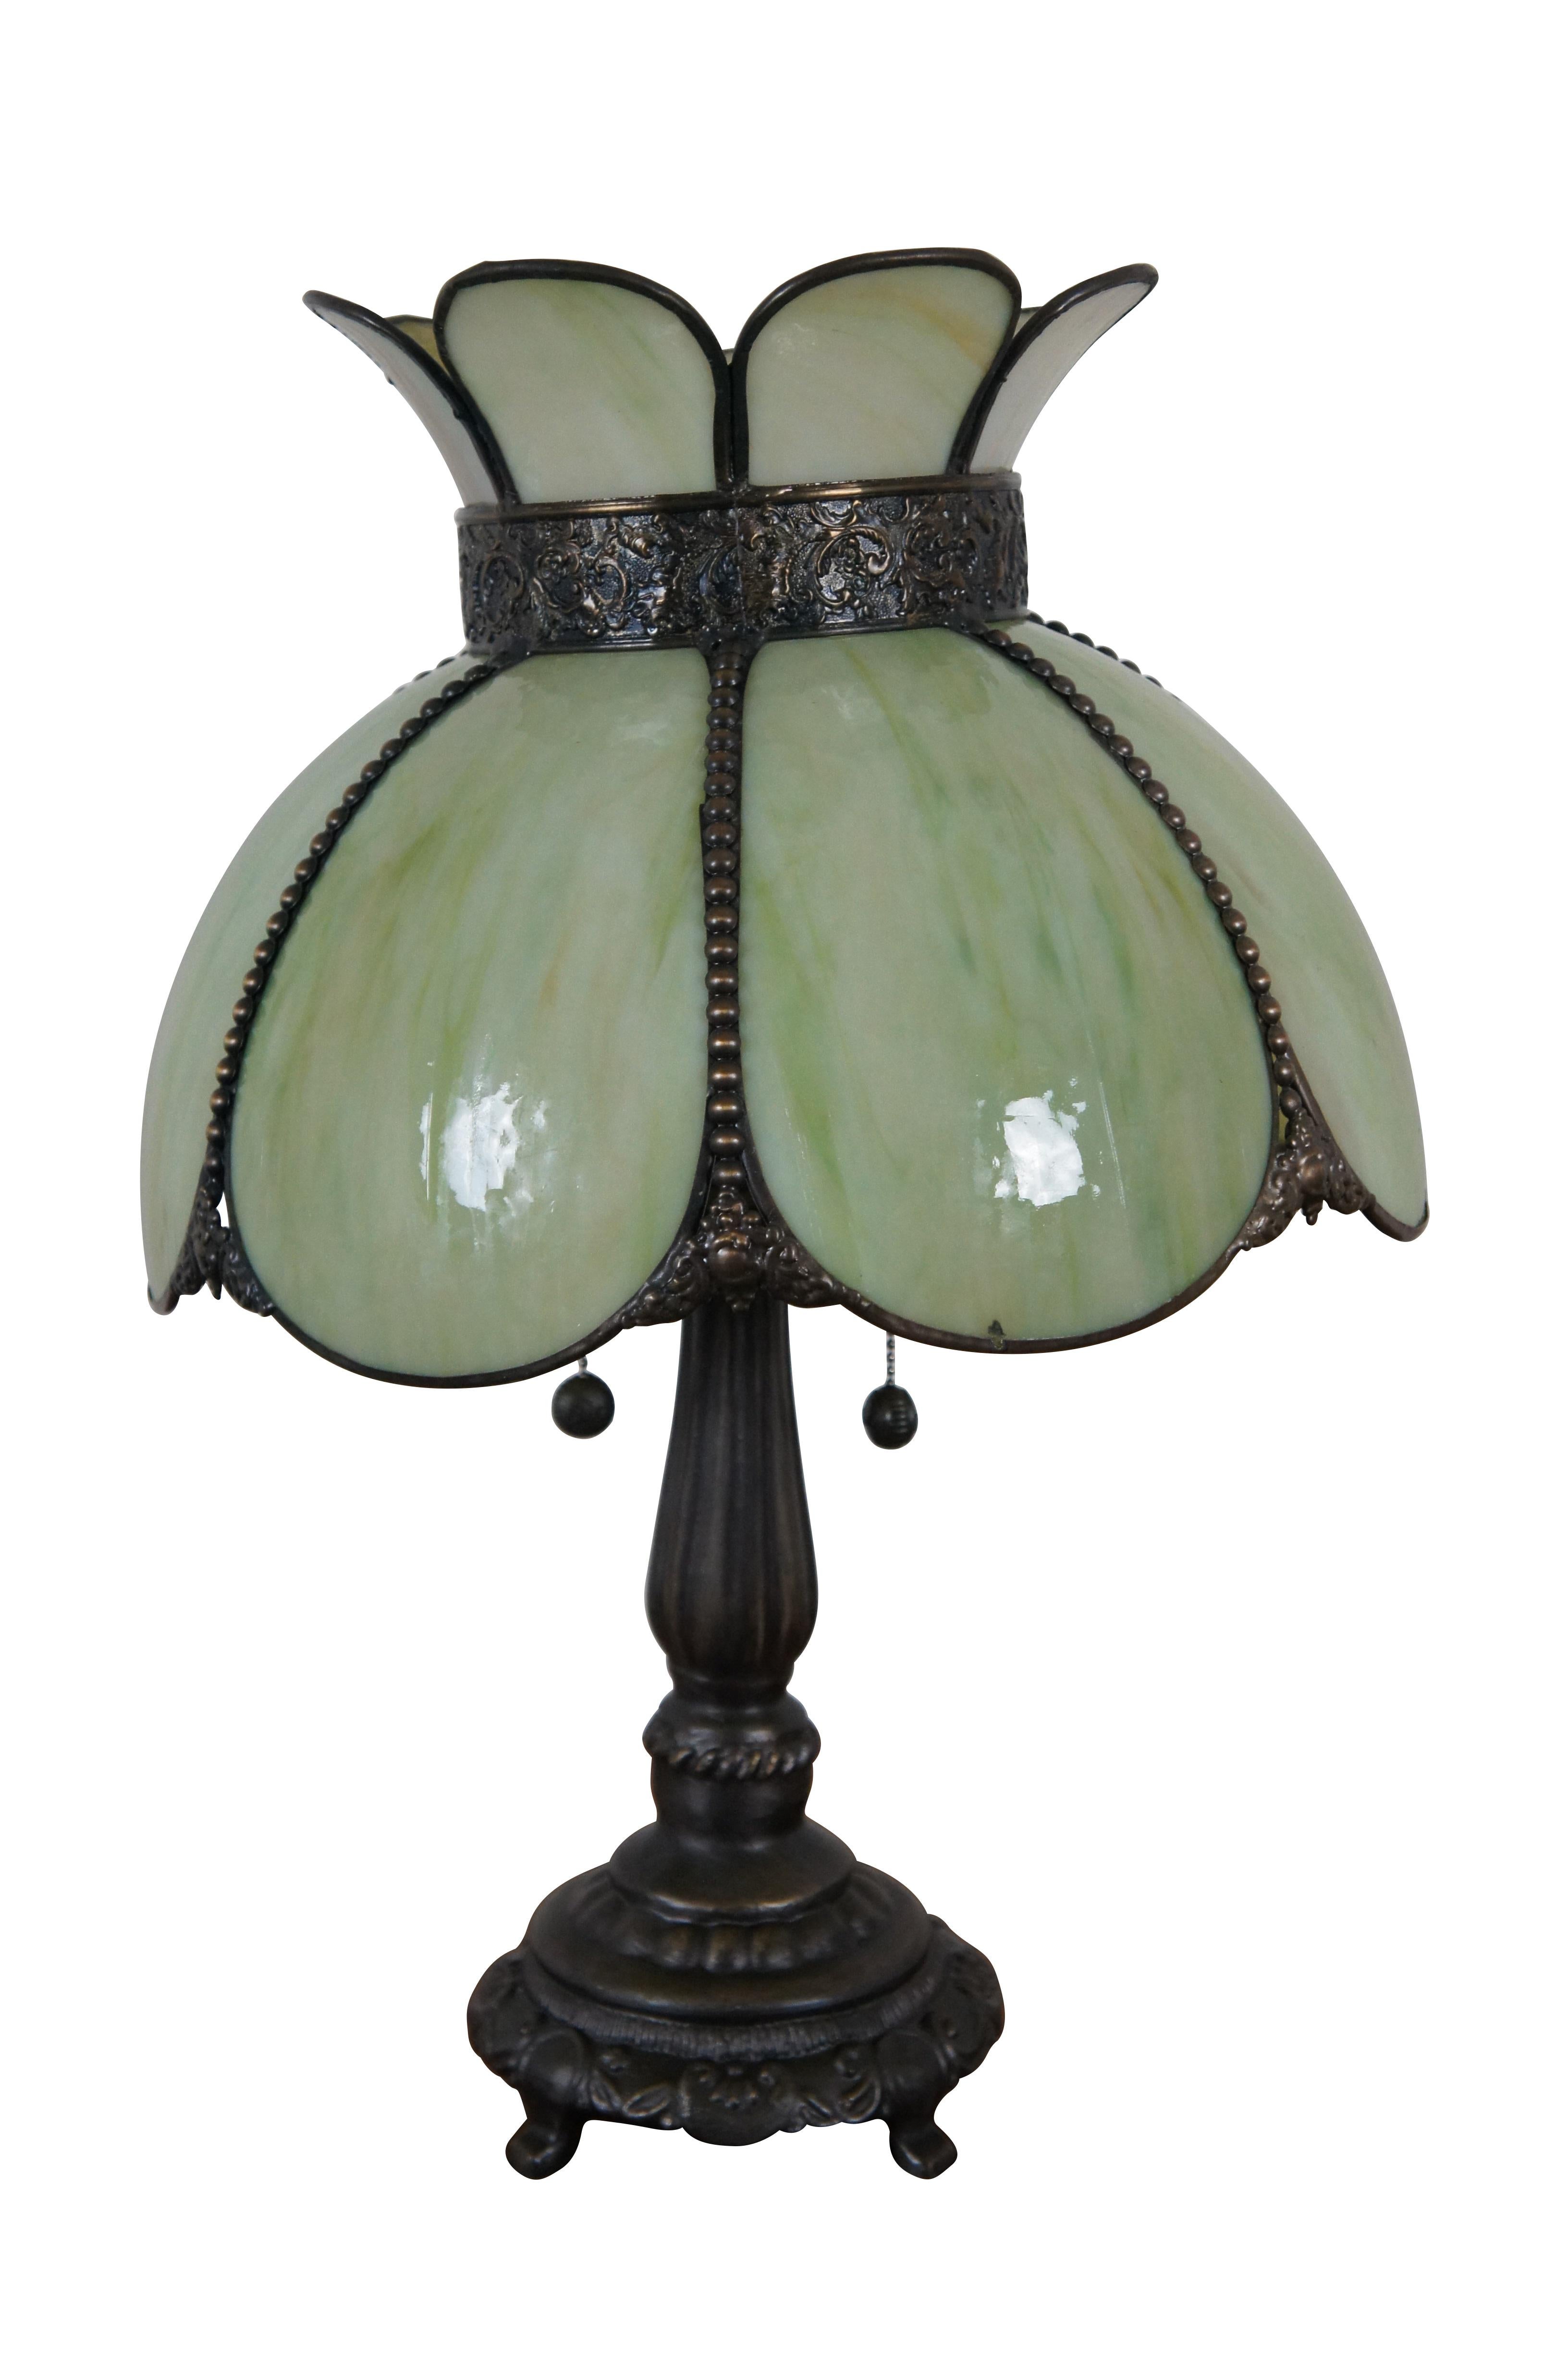 Vintage Victorian / Art Nouveau / Tiffany style two light parlor table lamp featuring green slag glass crown or tulip shaped shade supported by tapered column with footed base.

Dimensions:
15” x 21.5” (Diameter x Height)